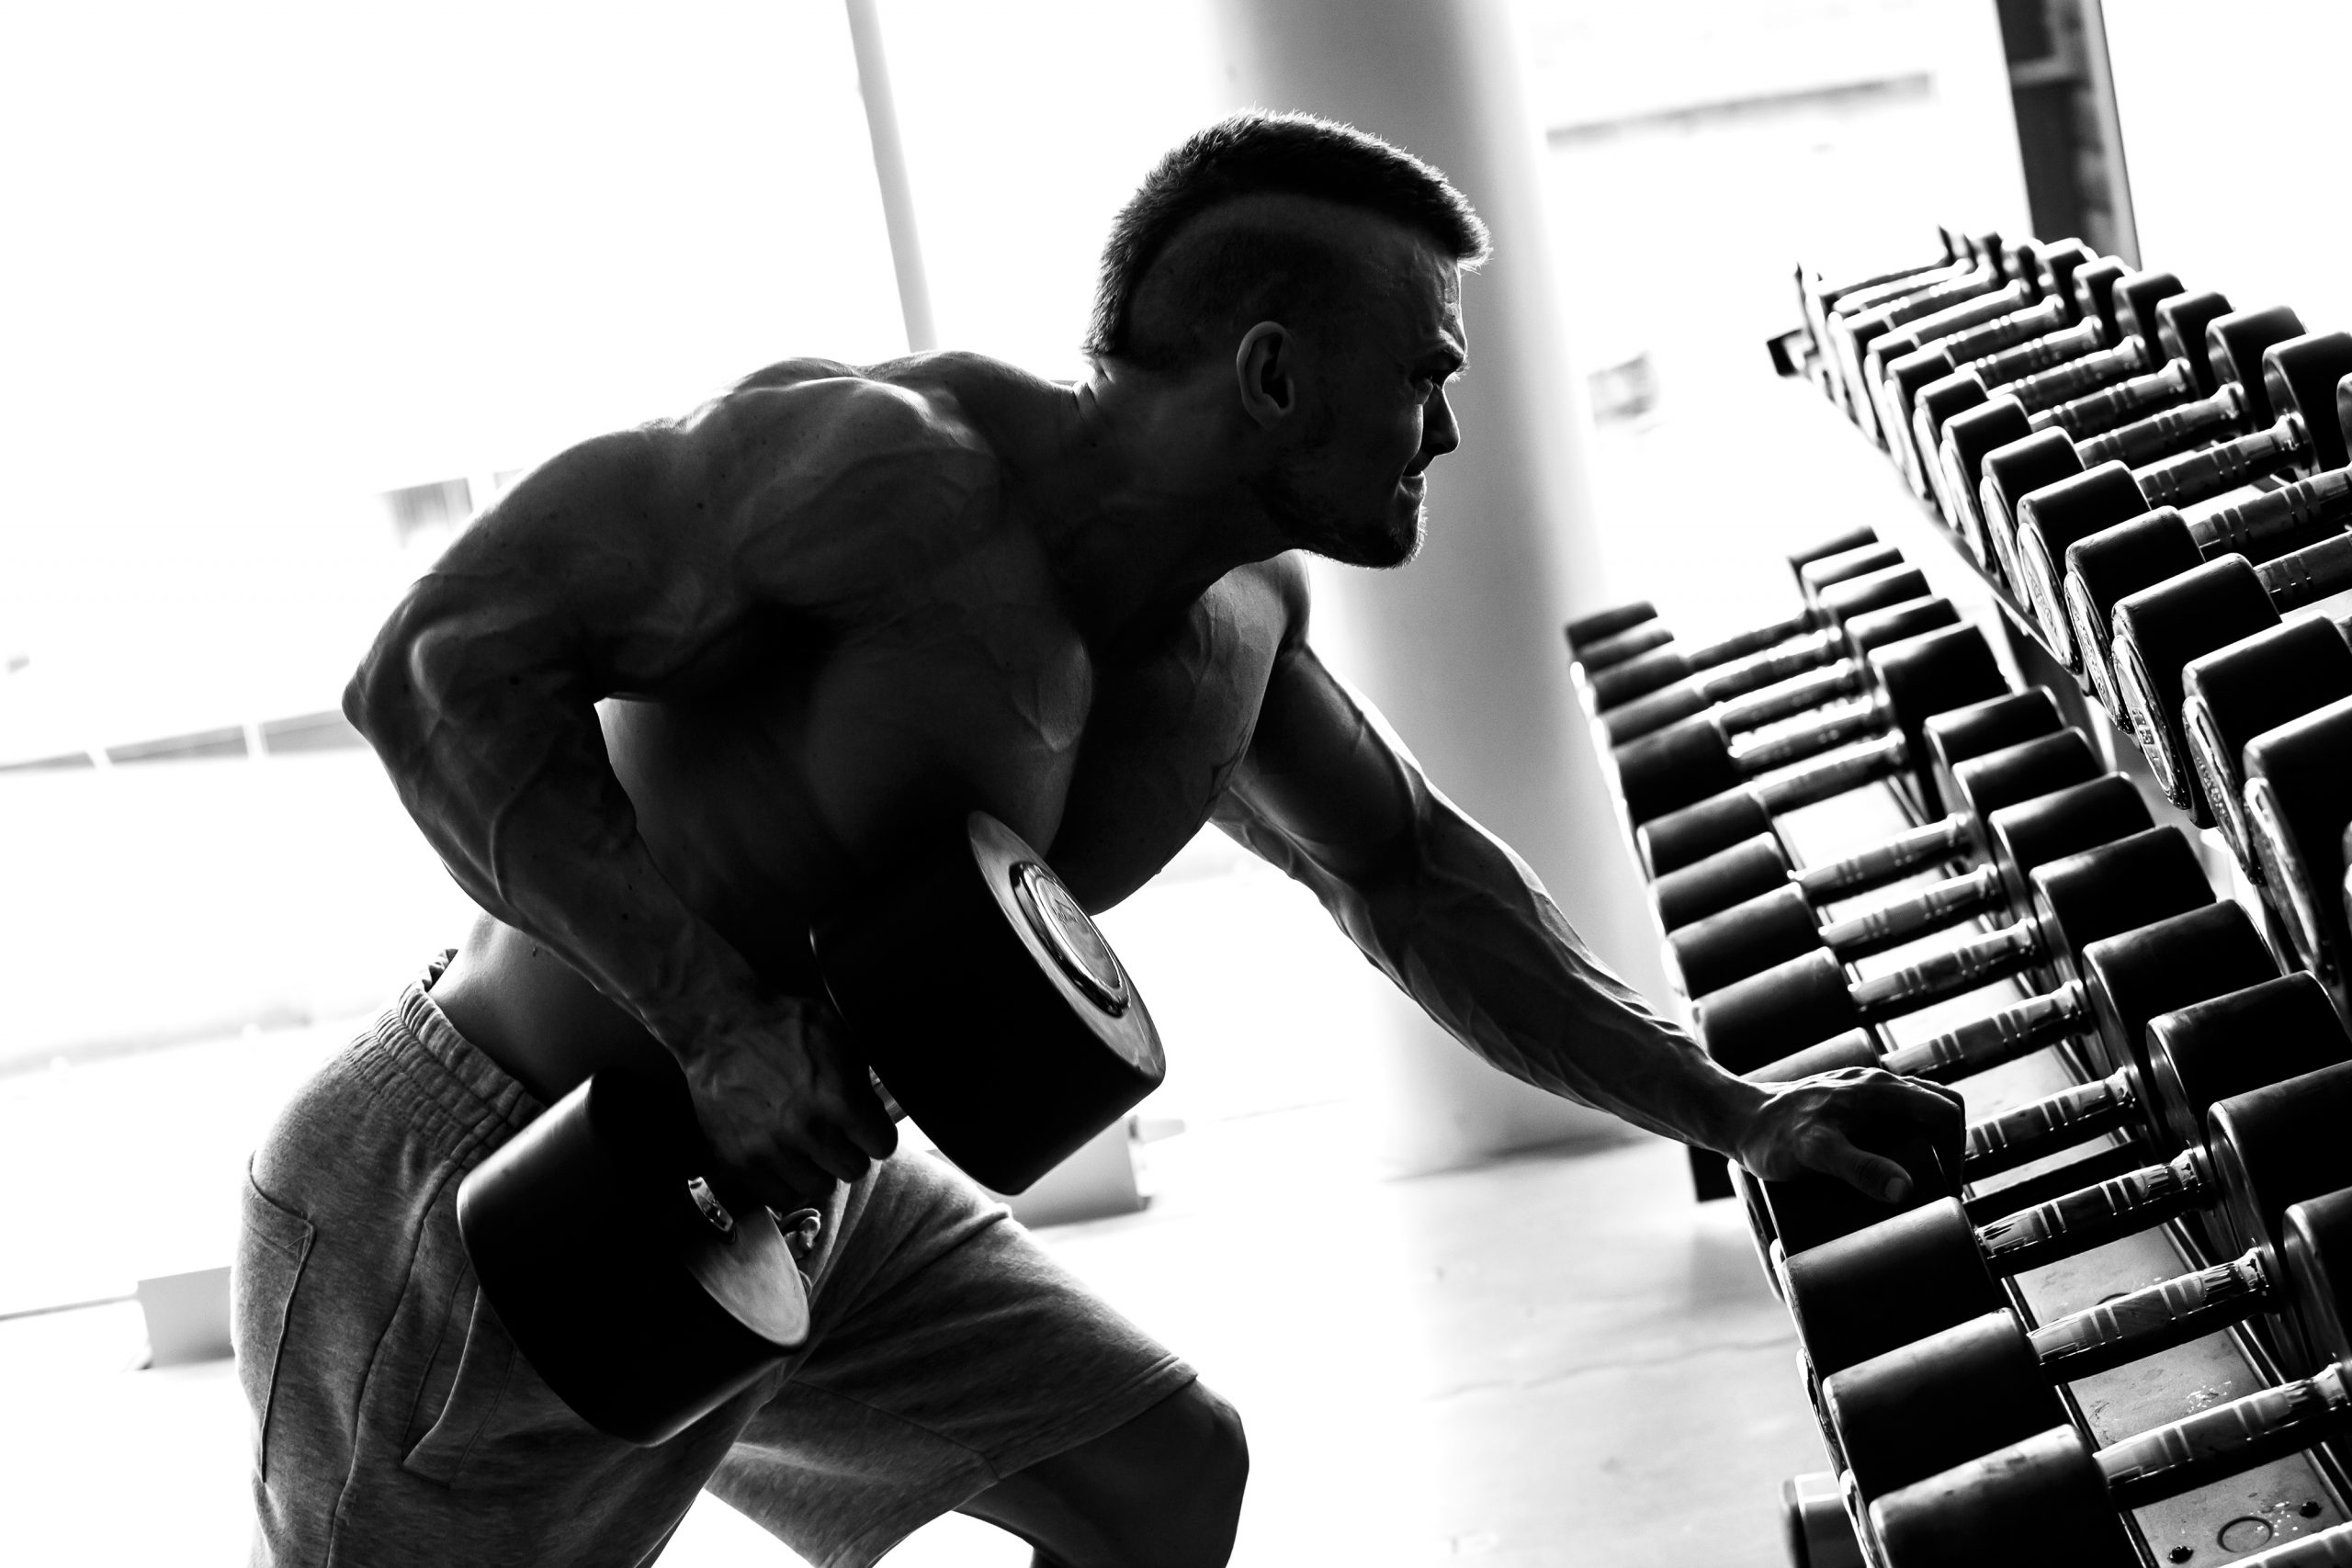 What are the effects of proper dumbbell rowing?